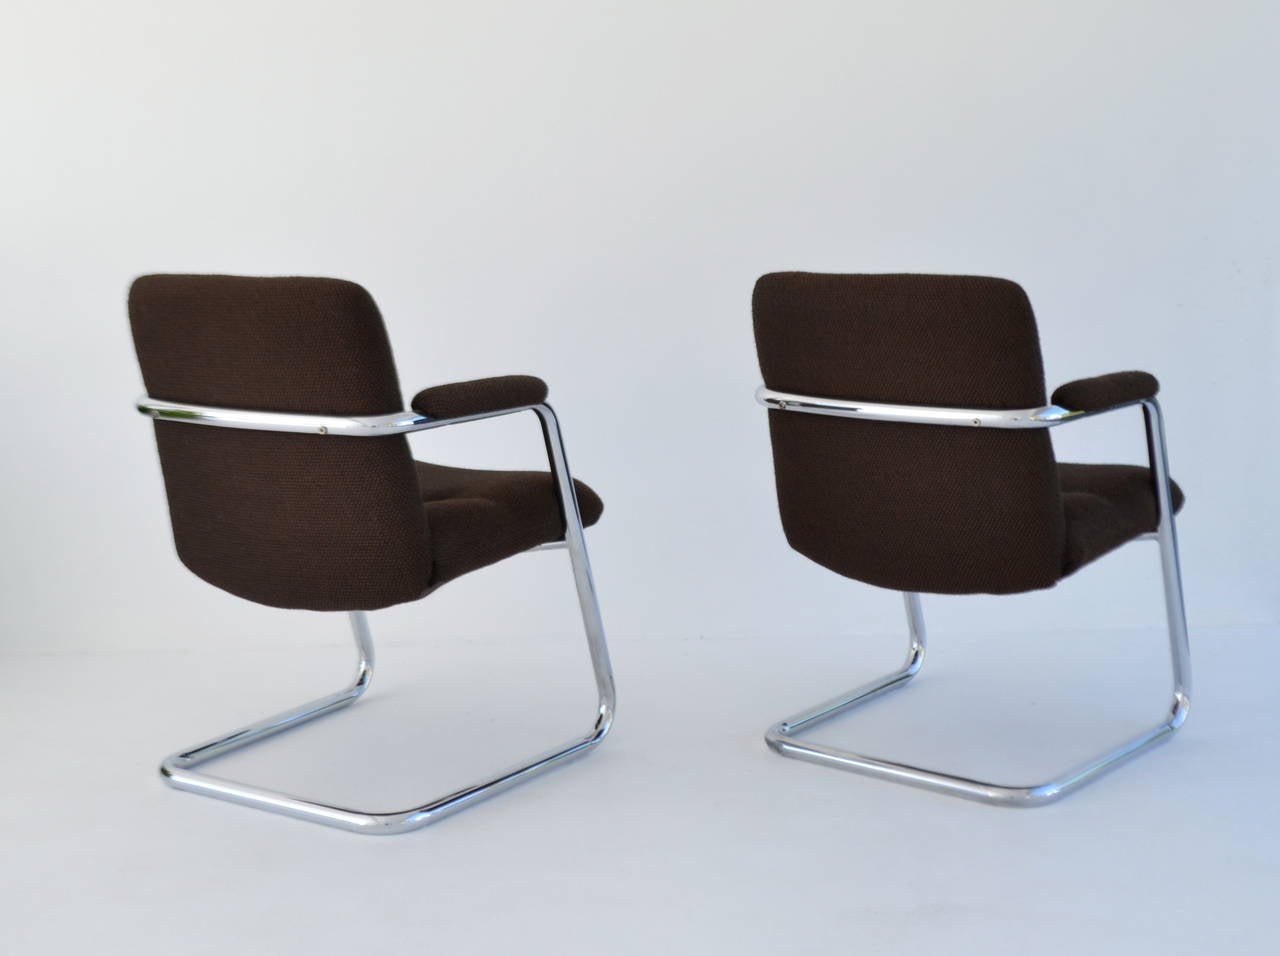 Chrome Pair of Mid-Century Lounge Chairs